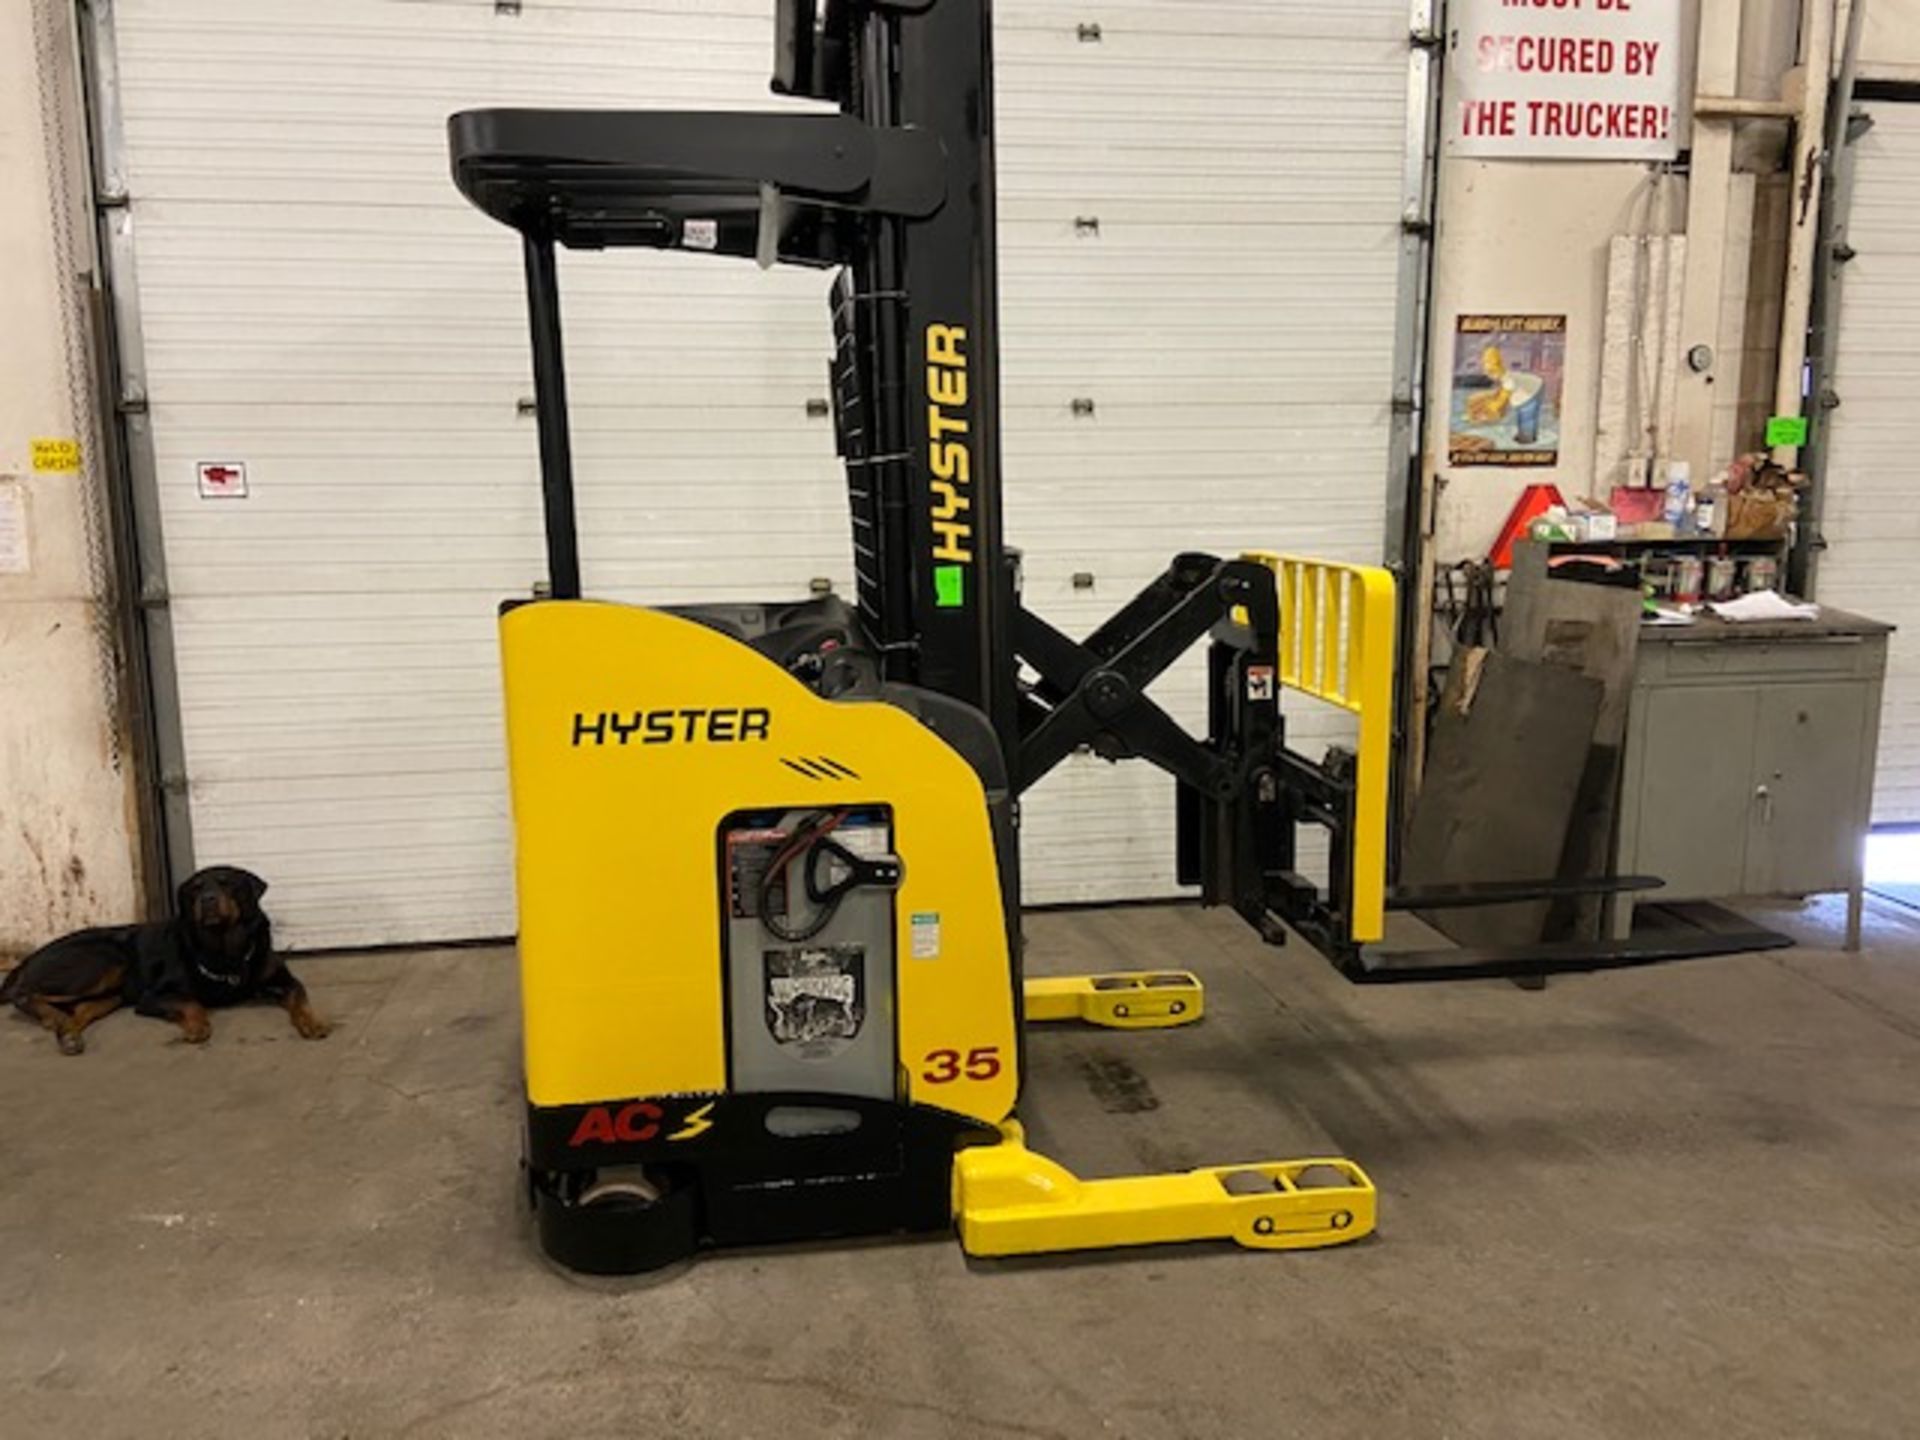 FREE CUSTOMS - 2012 Hyster Reach Truck Pallet Lifter REACH TRUCK electric 3500lbs with sideshift 3-